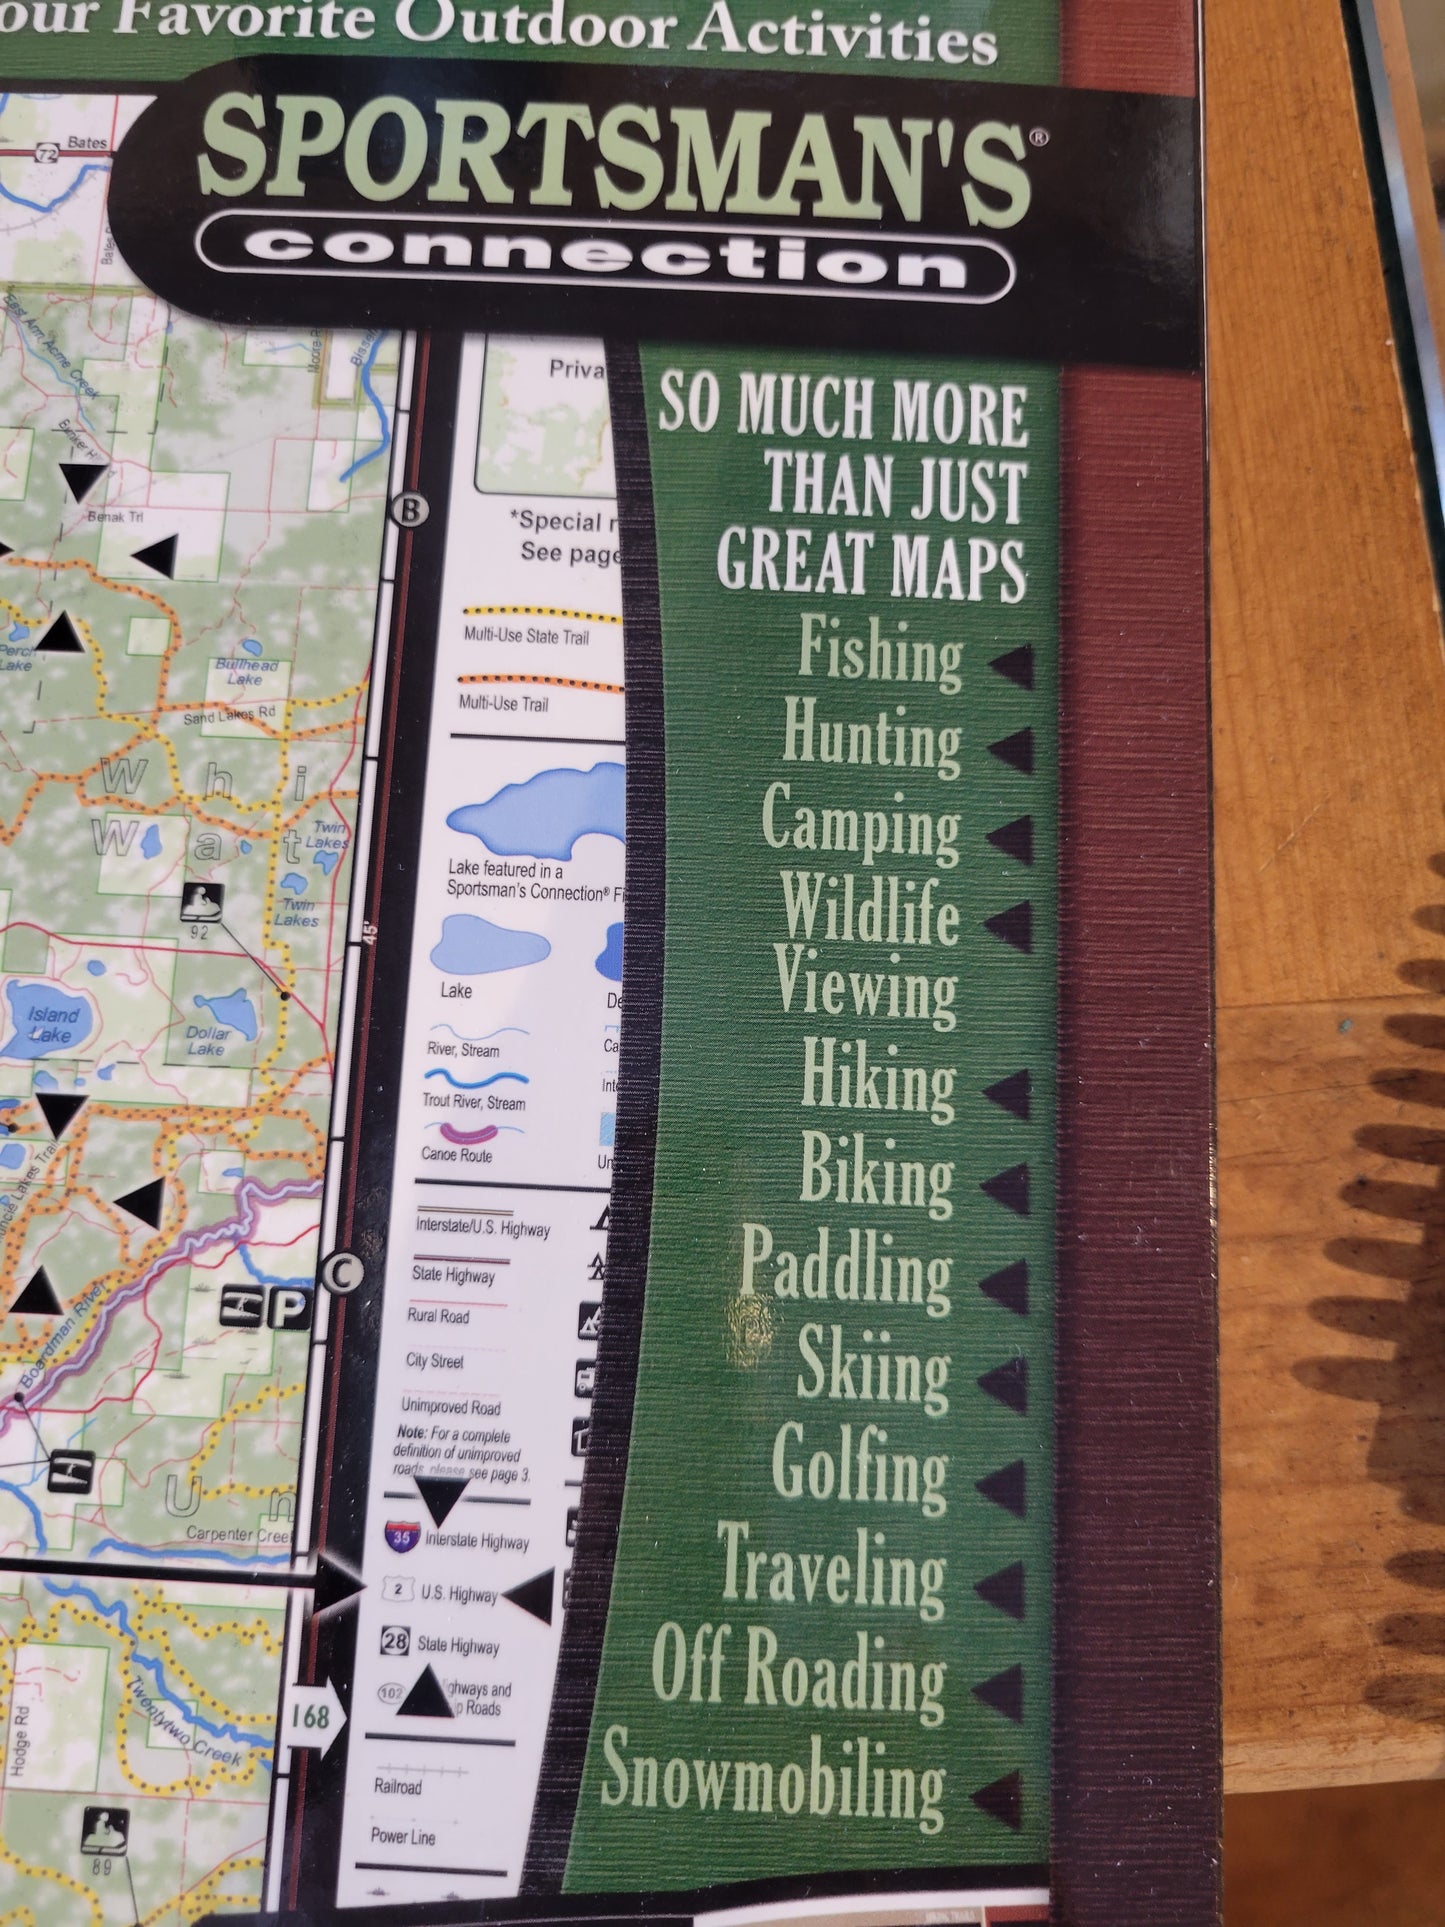 Northern Michigan all-outdoors Atlas and Field Guide